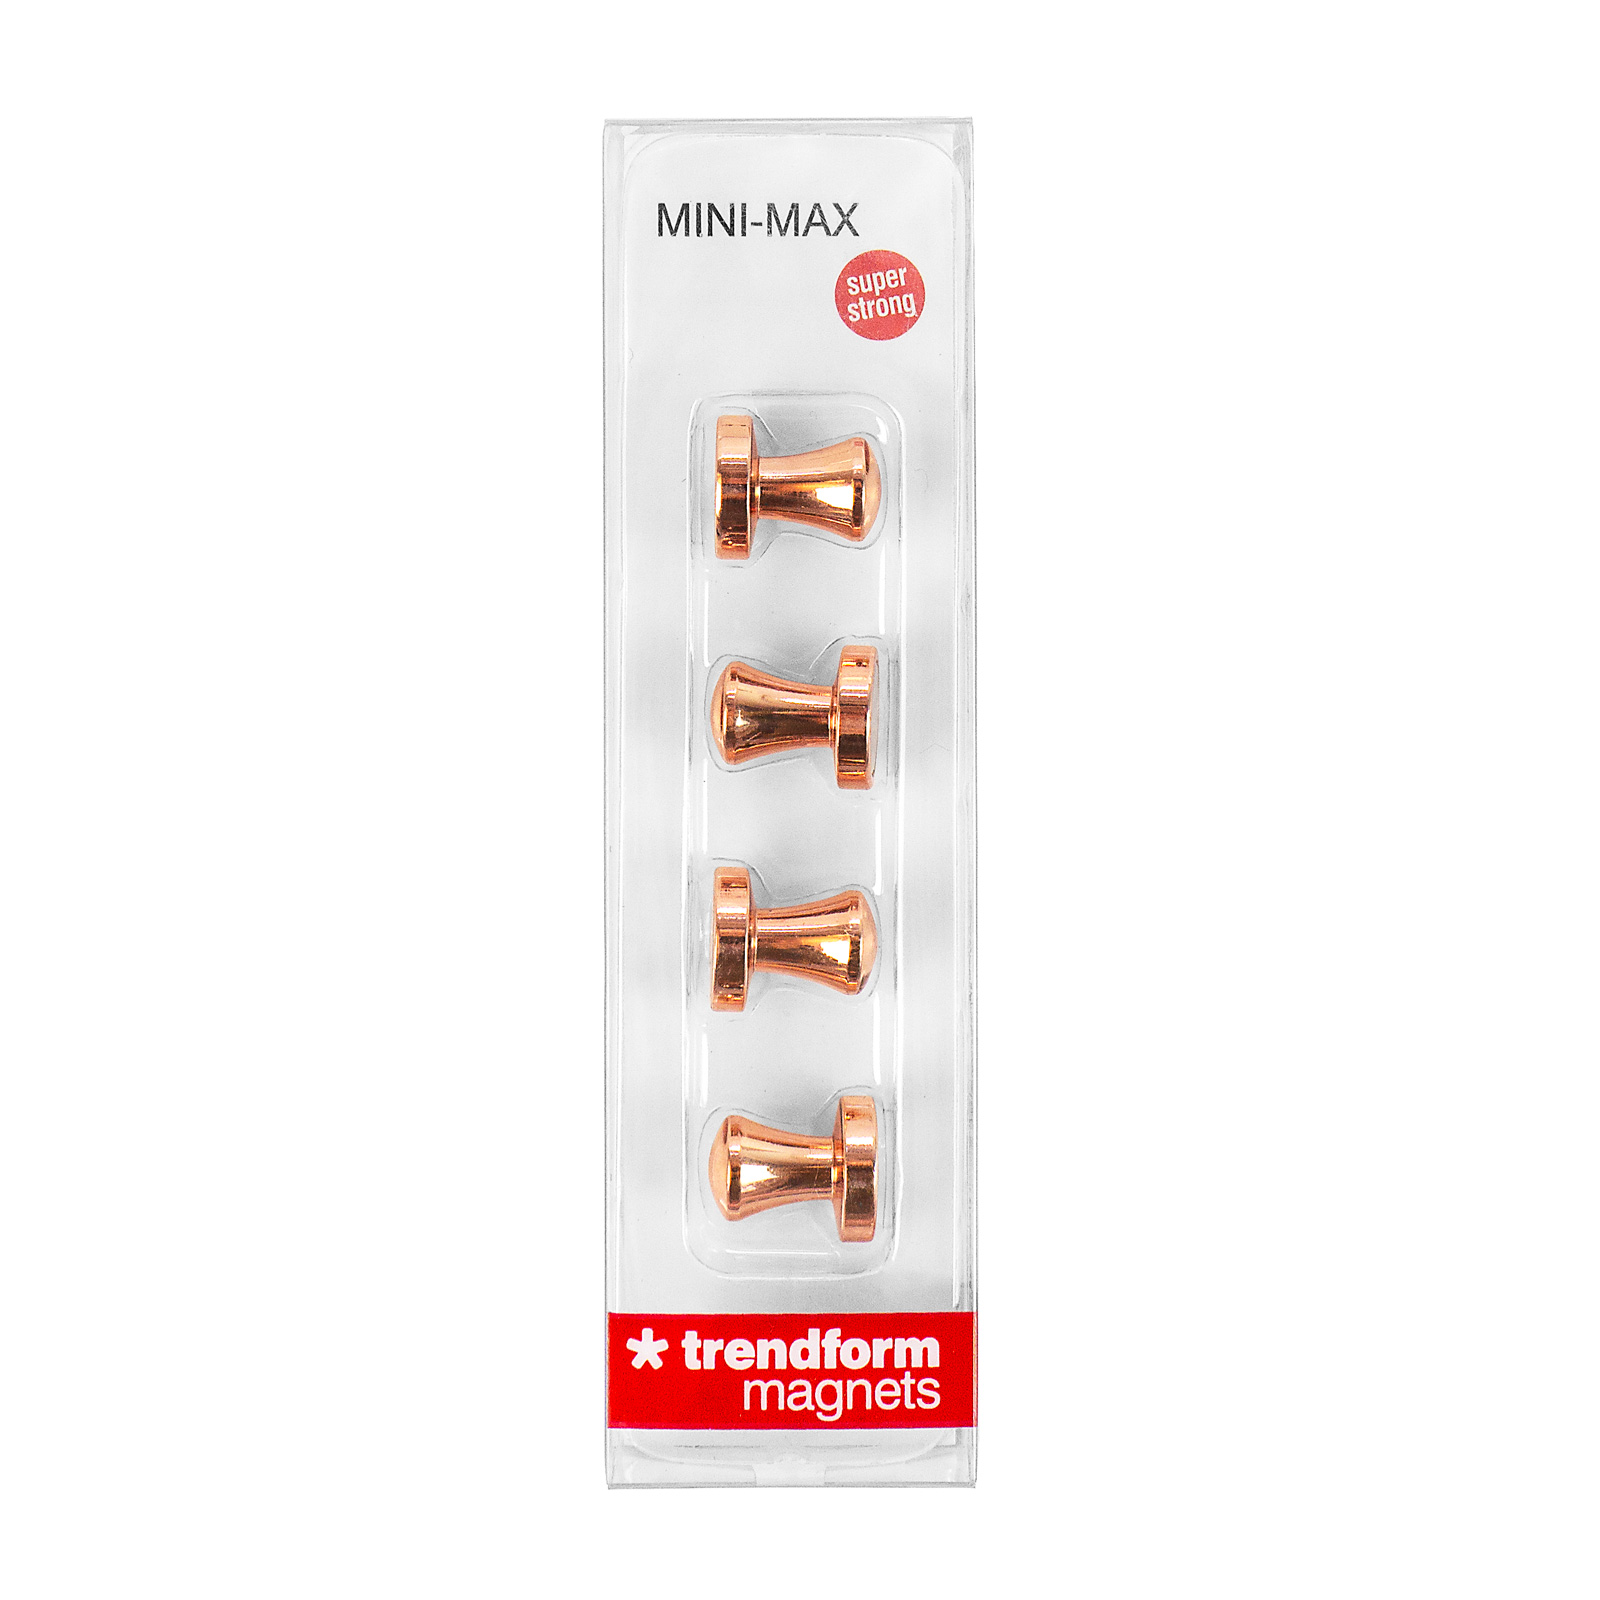 Superstrong Magnets MINI-MAX set of 4  copper